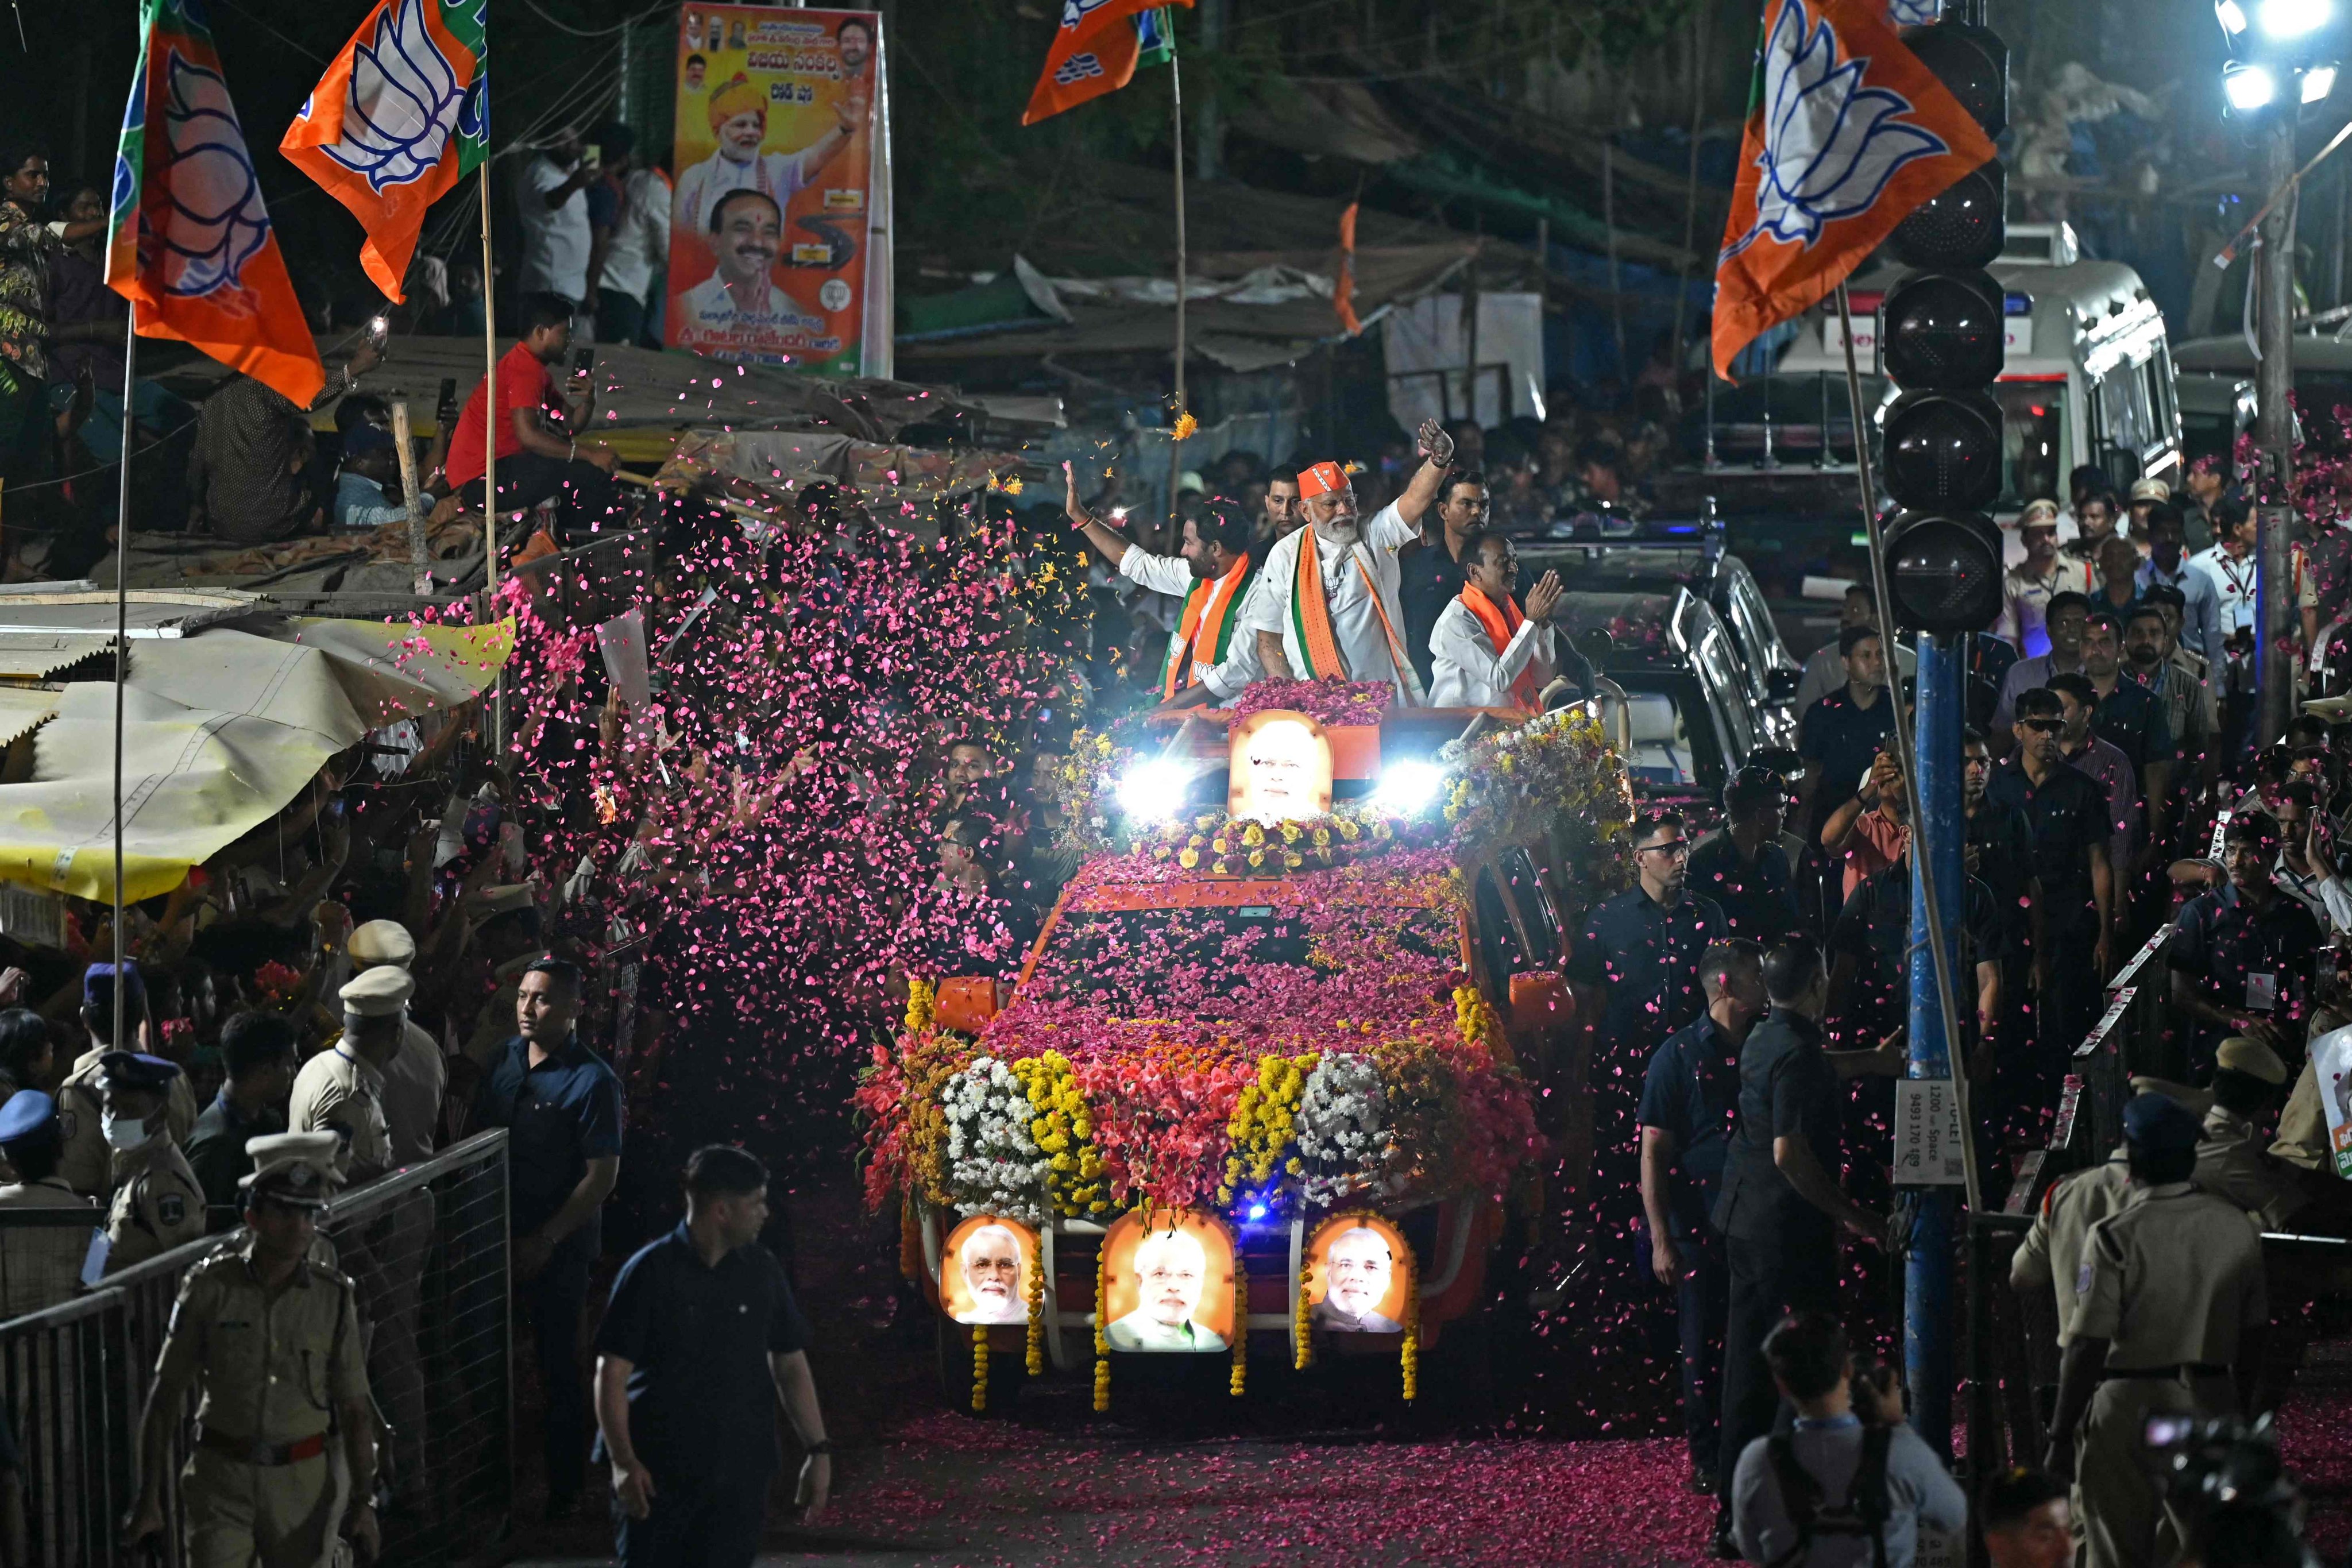 Indian Prime Minister Narendra Modi waves to his supporters from atop a vehicle during the Bharatiya Janata Party’s campaign ahead of national elections in Hyderabad on March 15. Photo: AFP